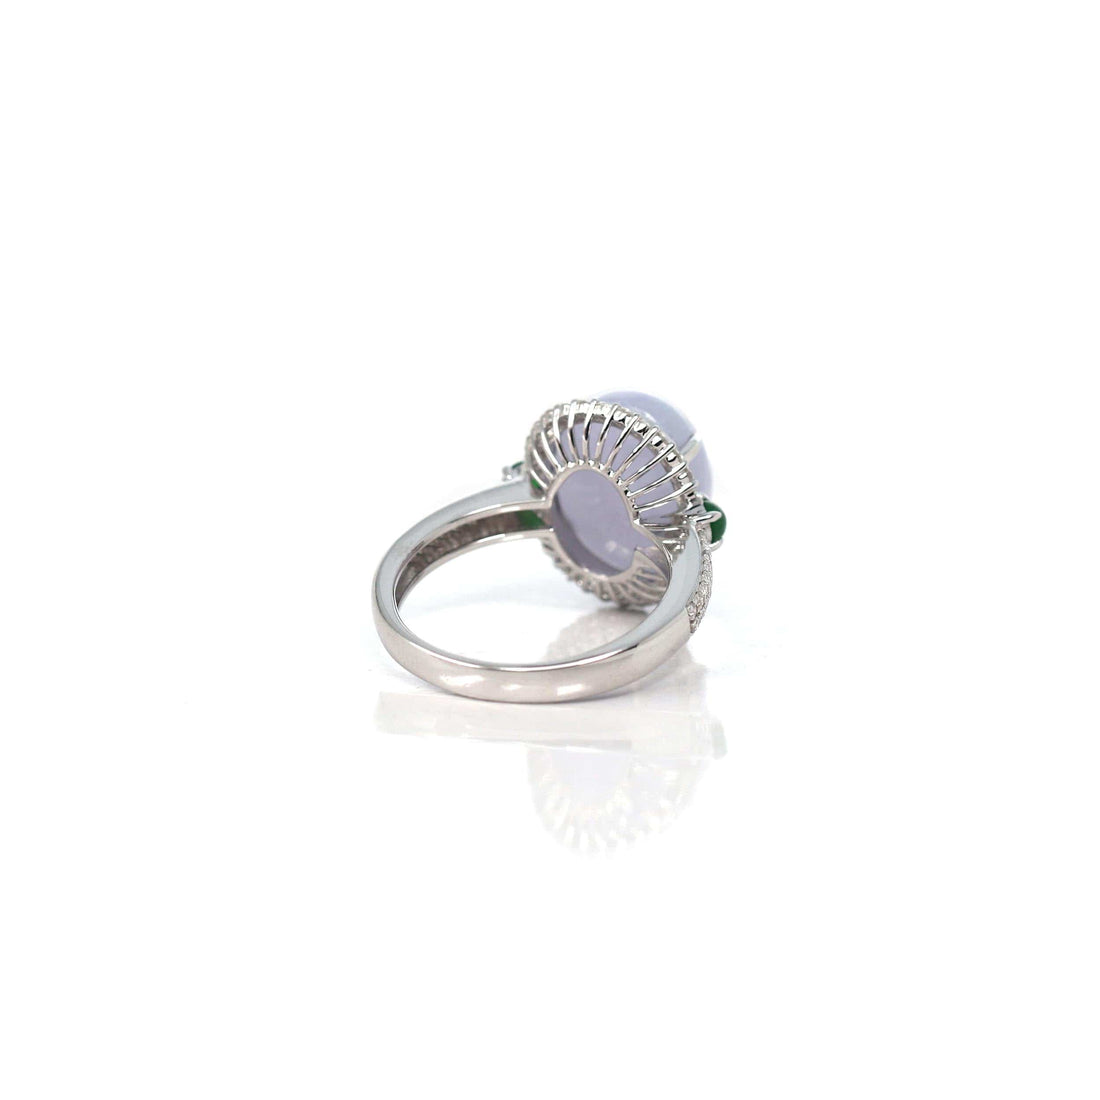 Baikalla Jewelry Jadeite Engagement Ring 18k White Gold Natural Rich Lavender Oval Jadeite Jade Engagement Ring With Diamonds